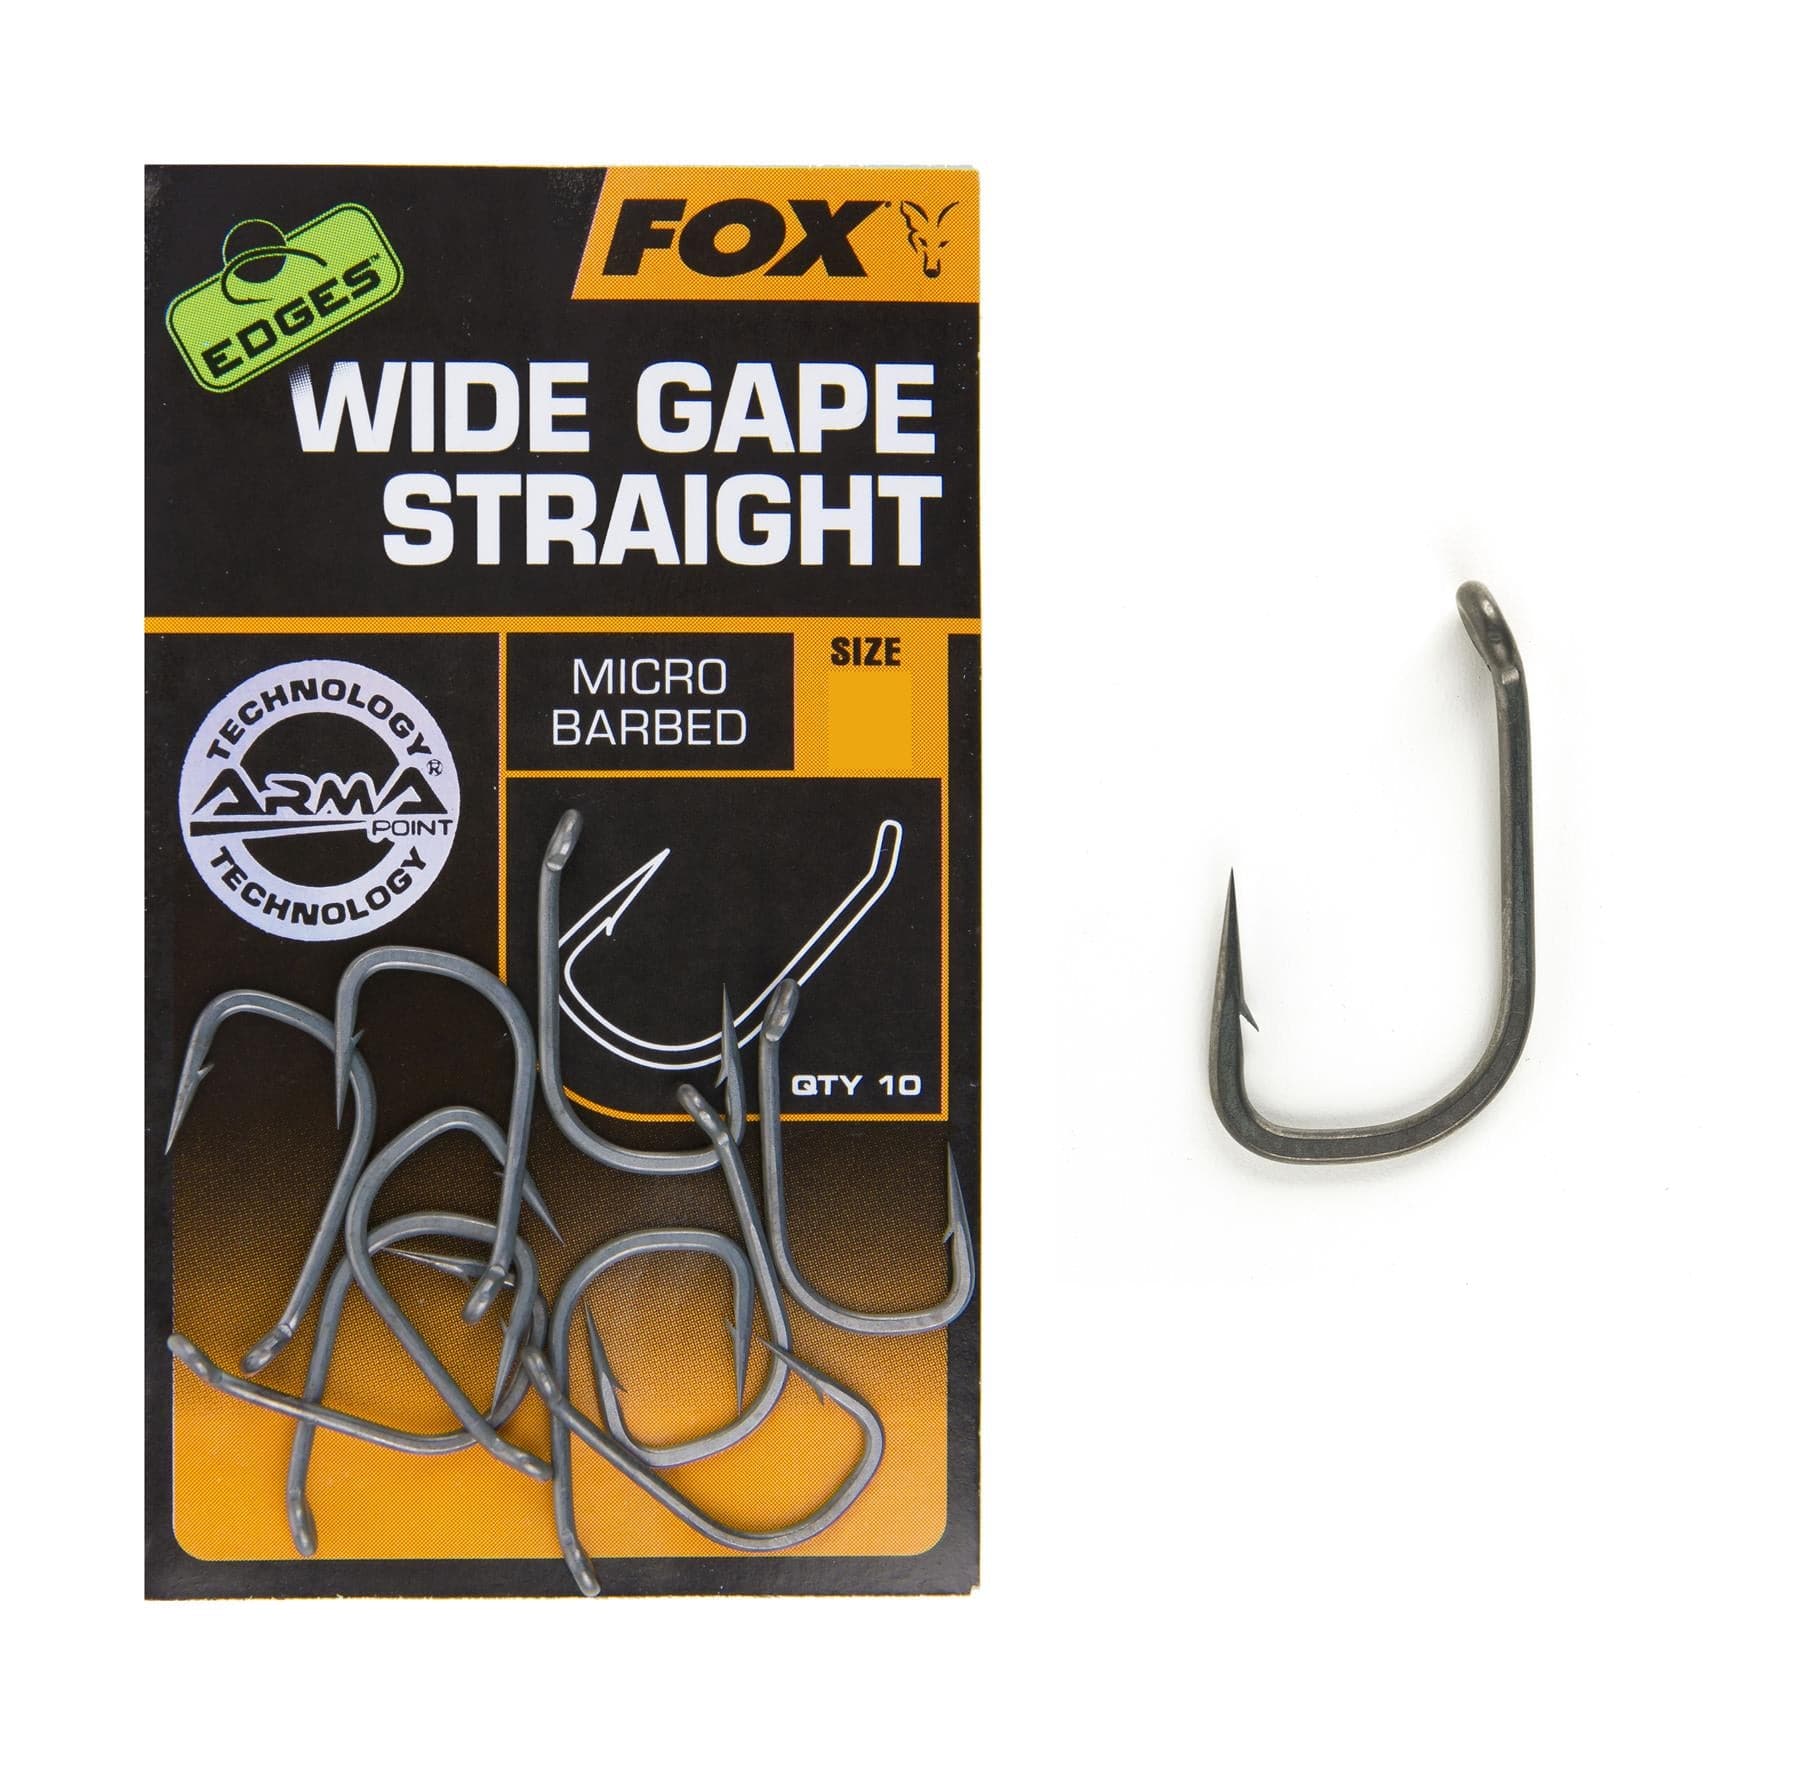 FOX Edges Armapoint Hooks Wide Gape Straight - Micro Barbed.